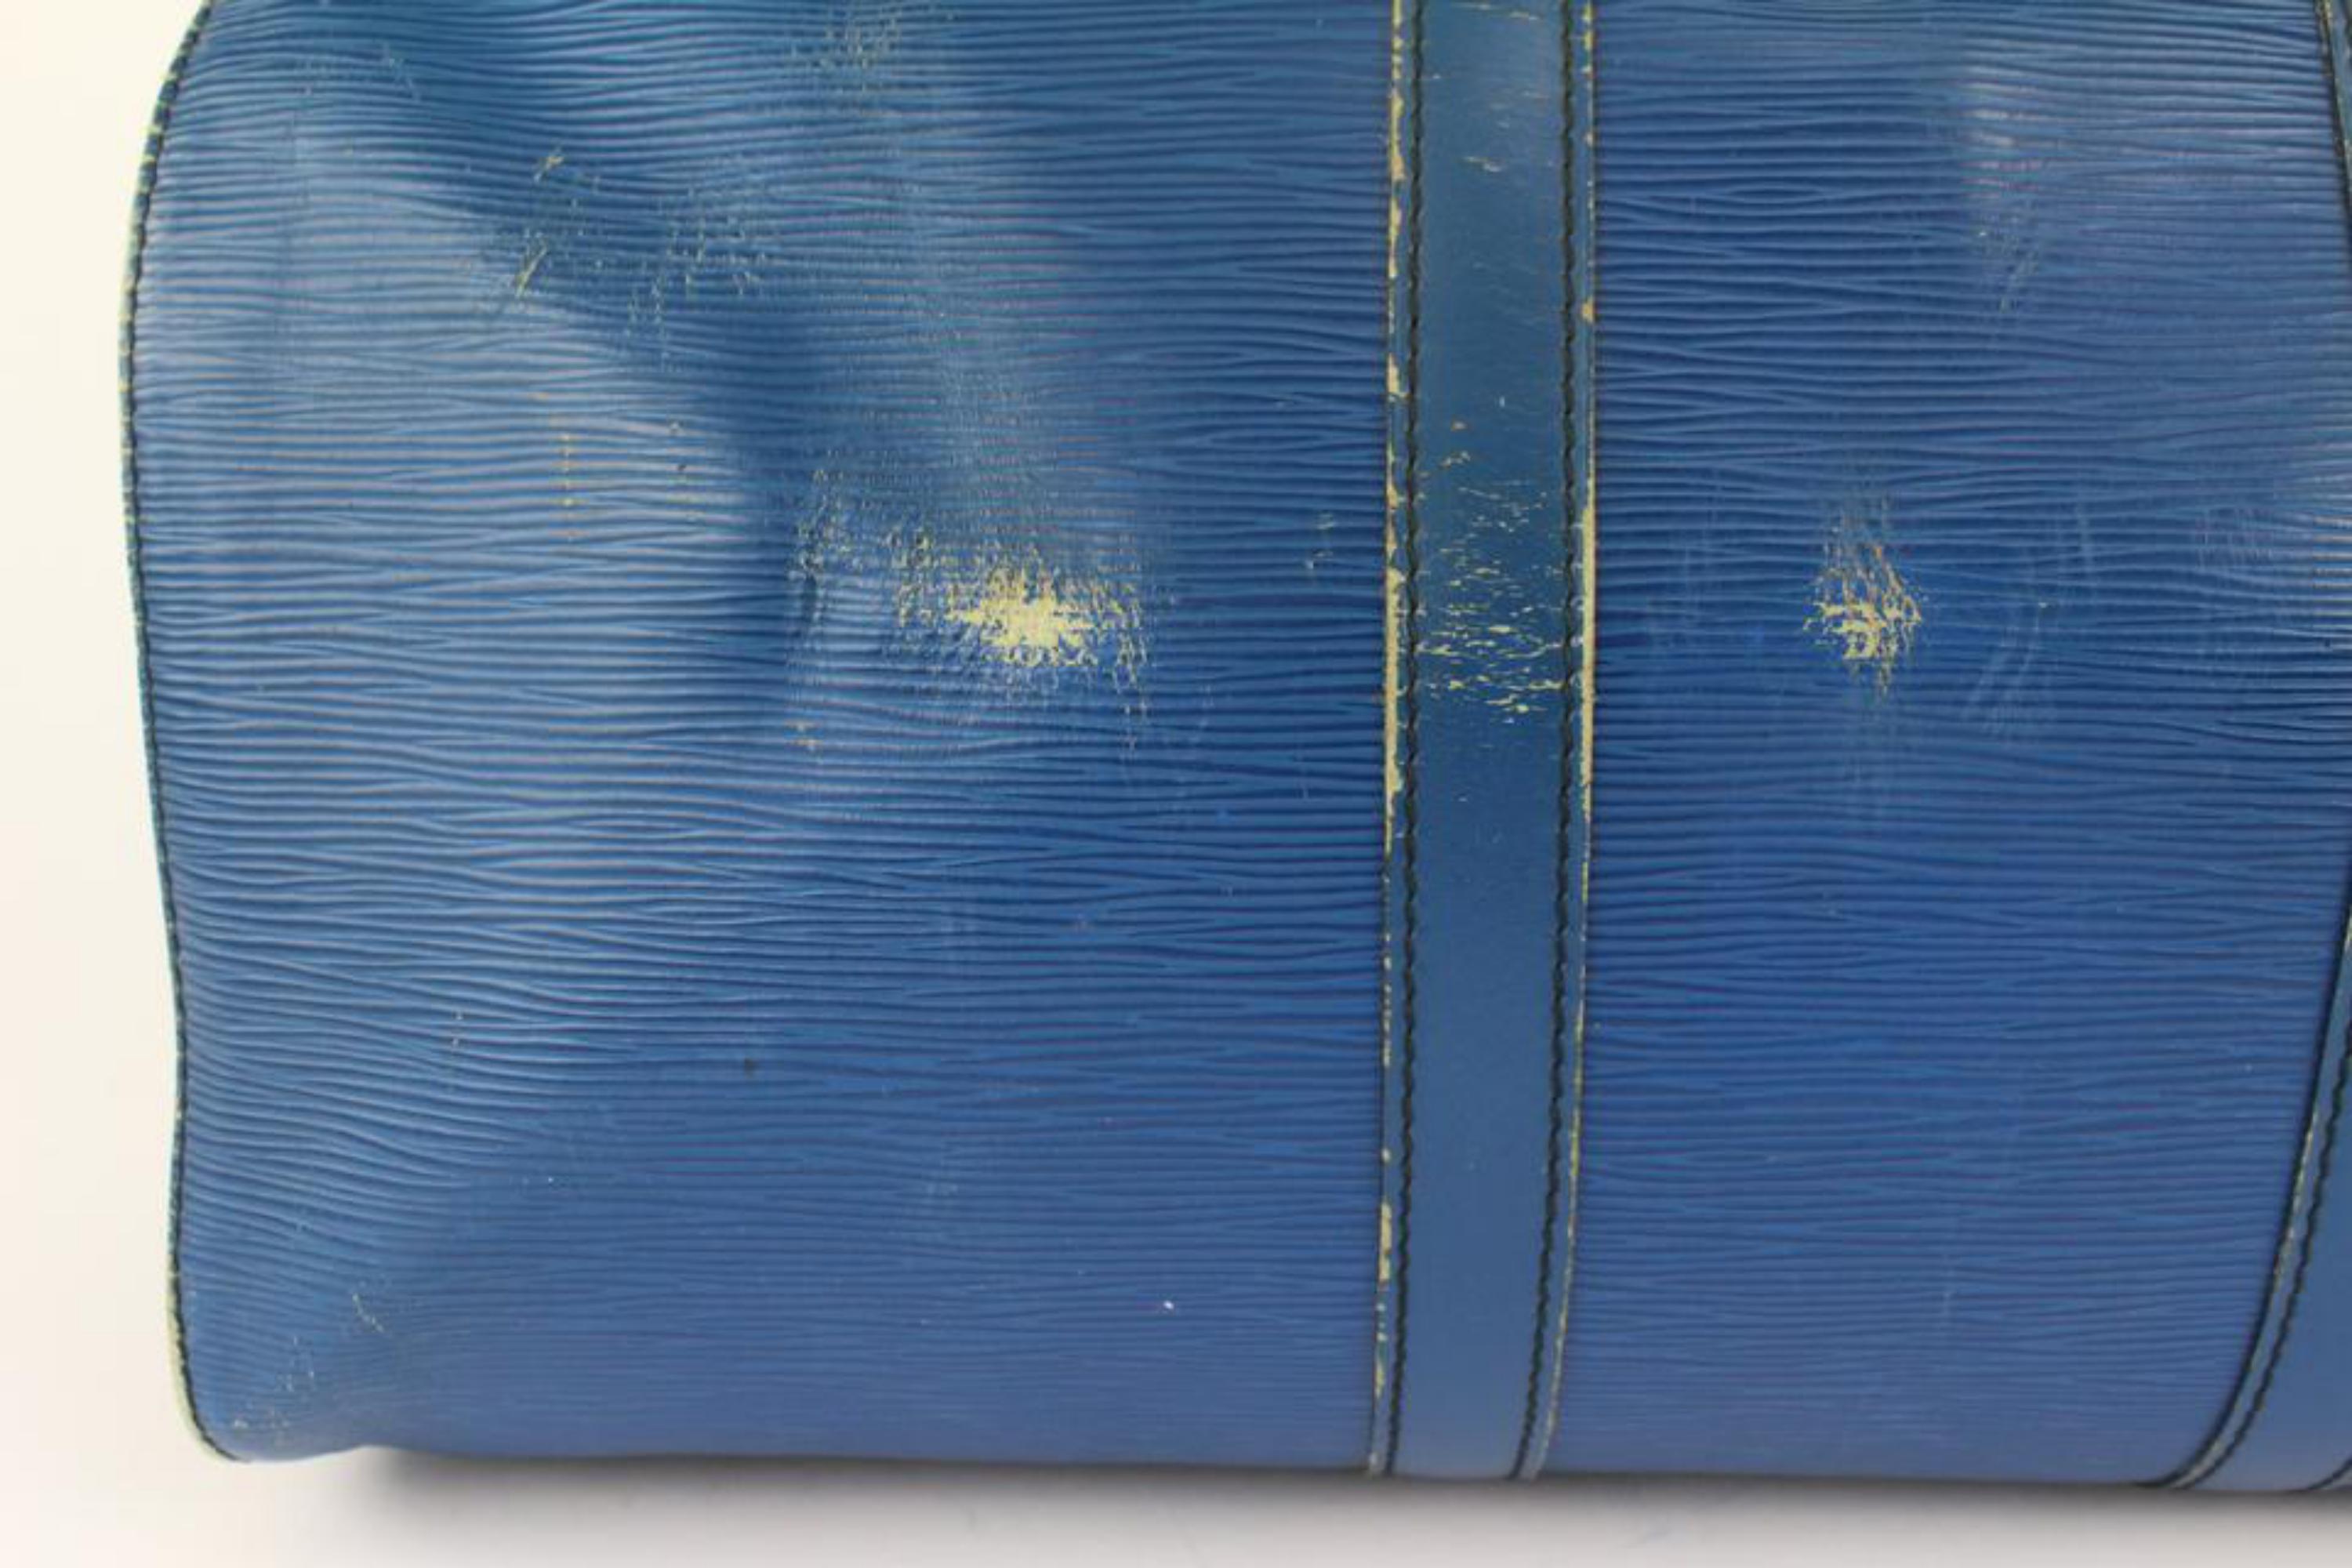 Louis Vuitton Blue Epi Leather Toledo Keepall 45 Boston Duffle Bag 22LV106 In Fair Condition For Sale In Dix hills, NY